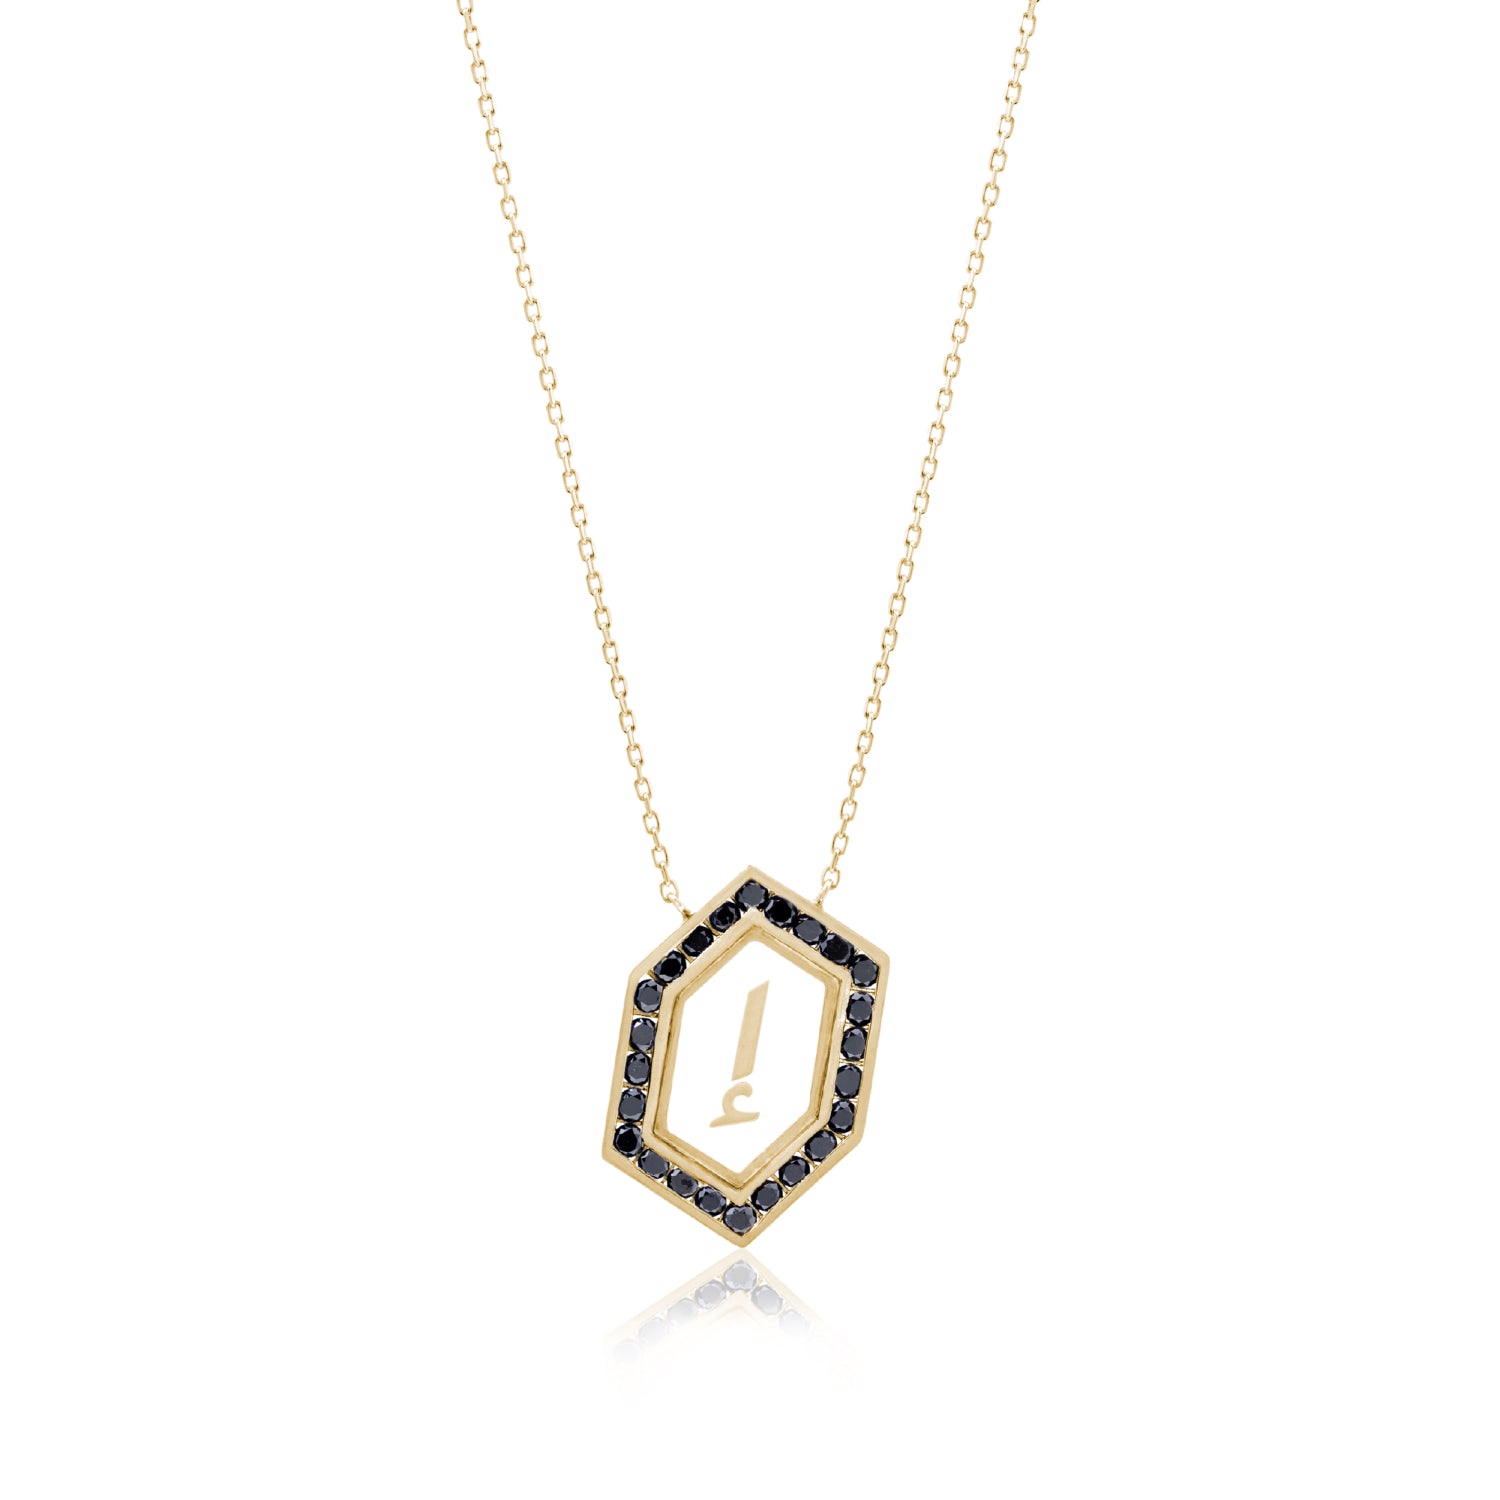 Qamoos 1.0 Letter إ Black Diamond Necklace in Yellow Gold